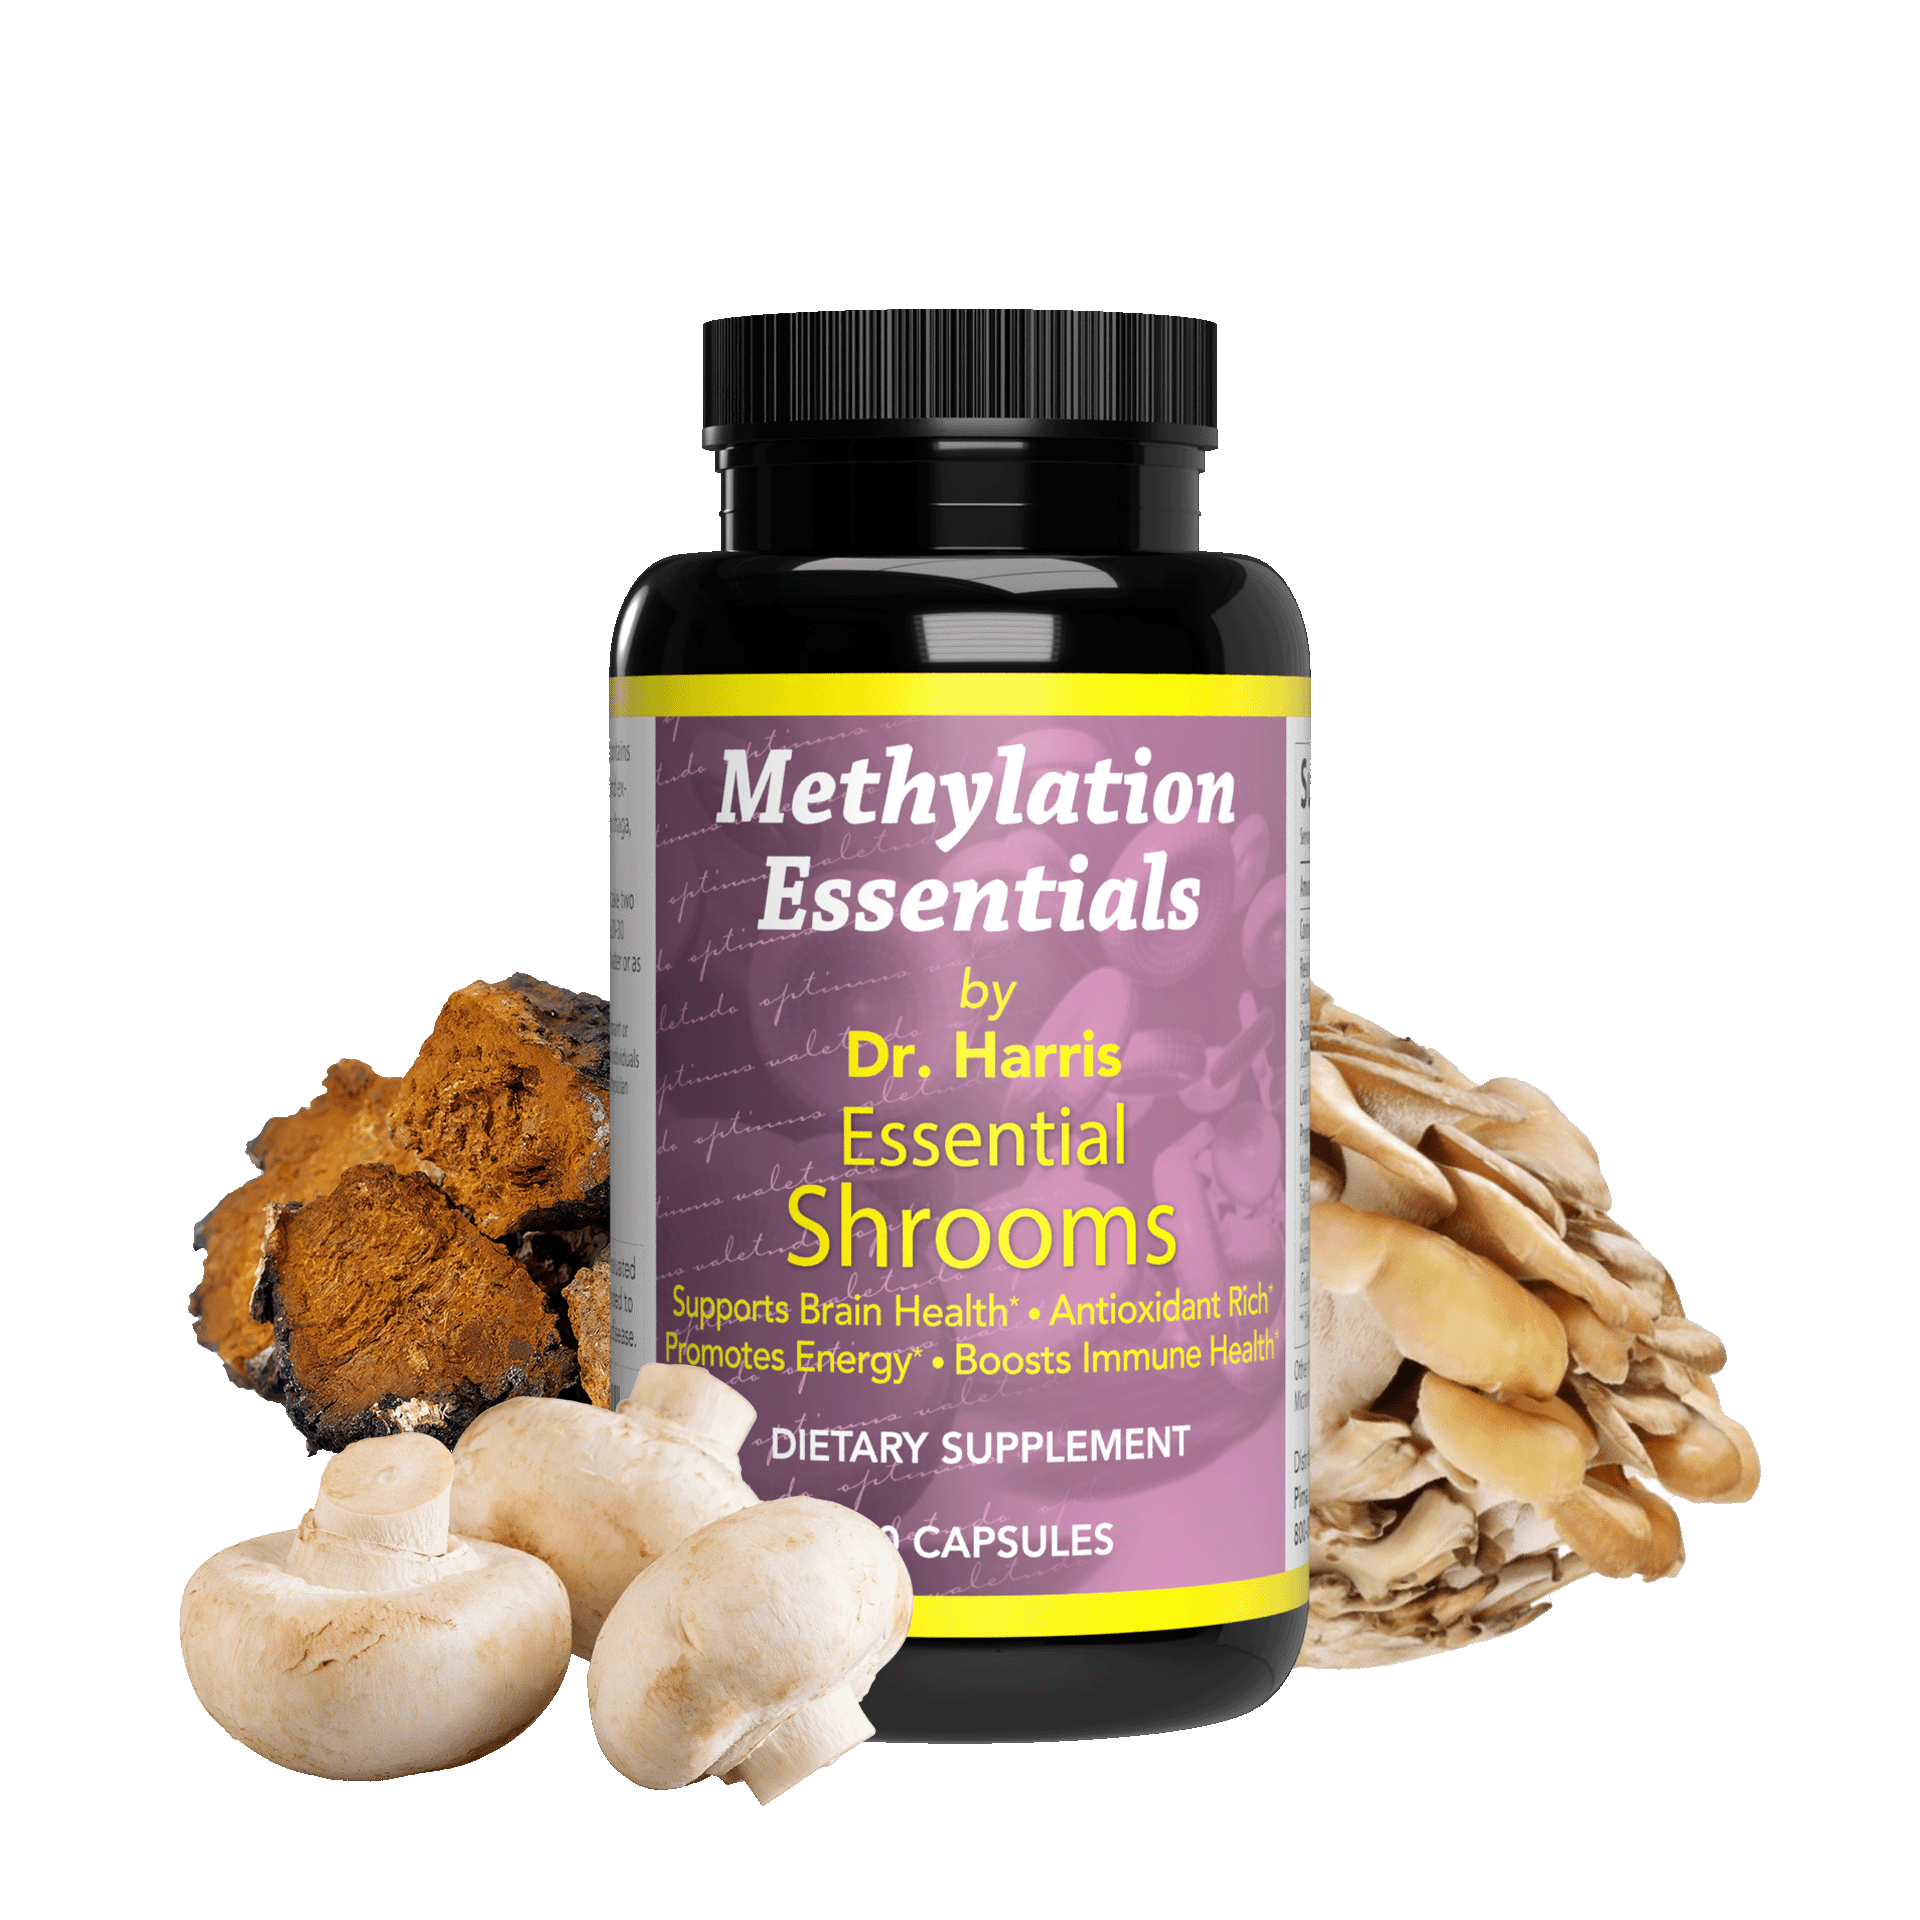 Image of a bottle of Essentials Shrooms. Around the bottle are Mitaki, white button, and Chaga mushrooms.